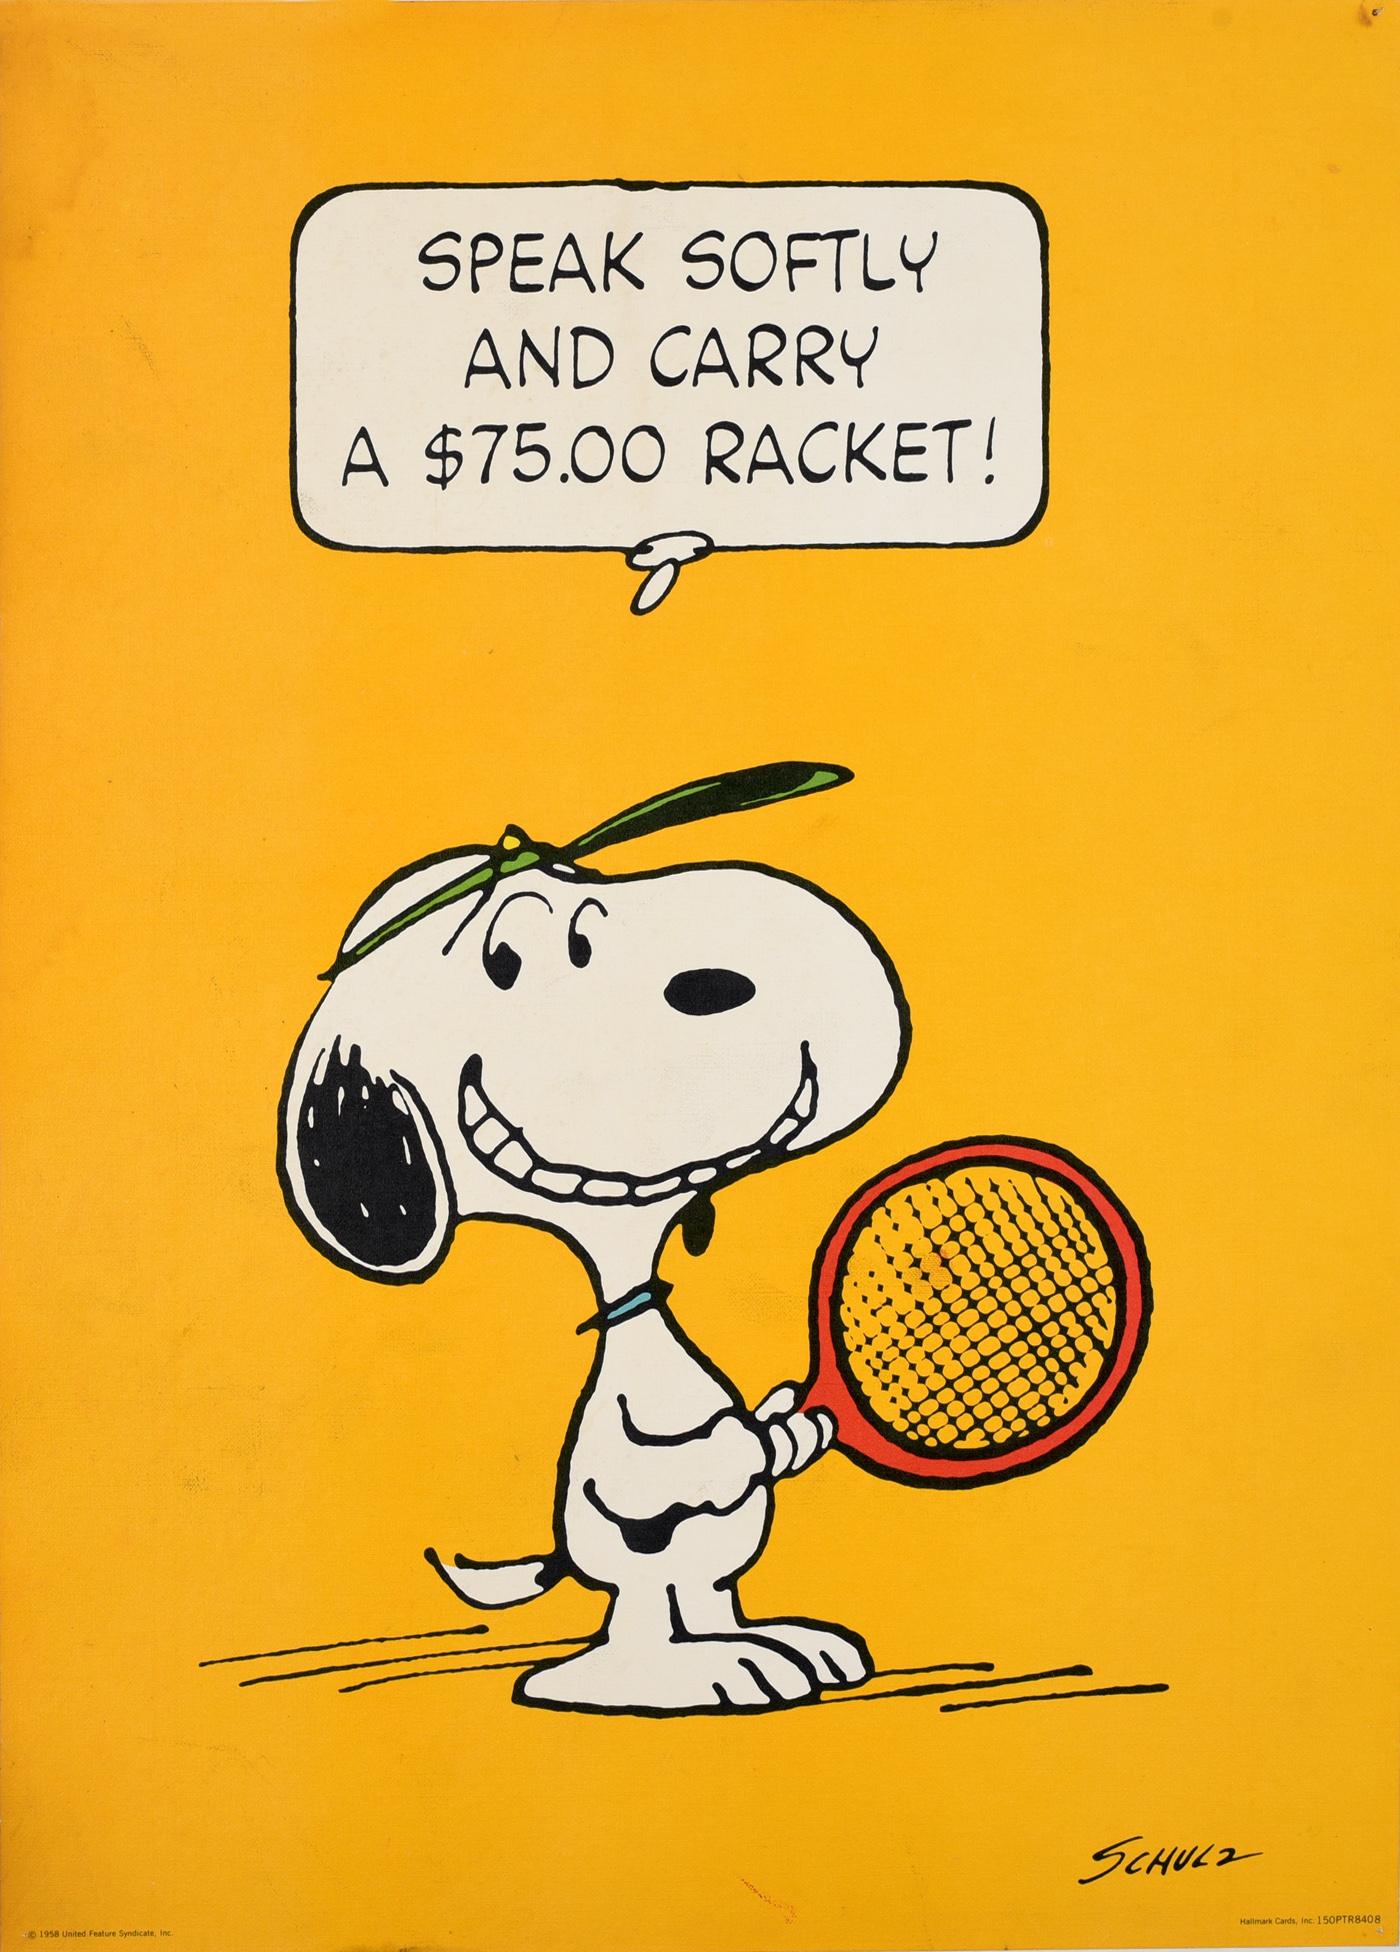 Charles M. Schulz Print - Original Vintage Snoopy Poster Tennis Cartoon Speak Softy And Carry A $75 Racket